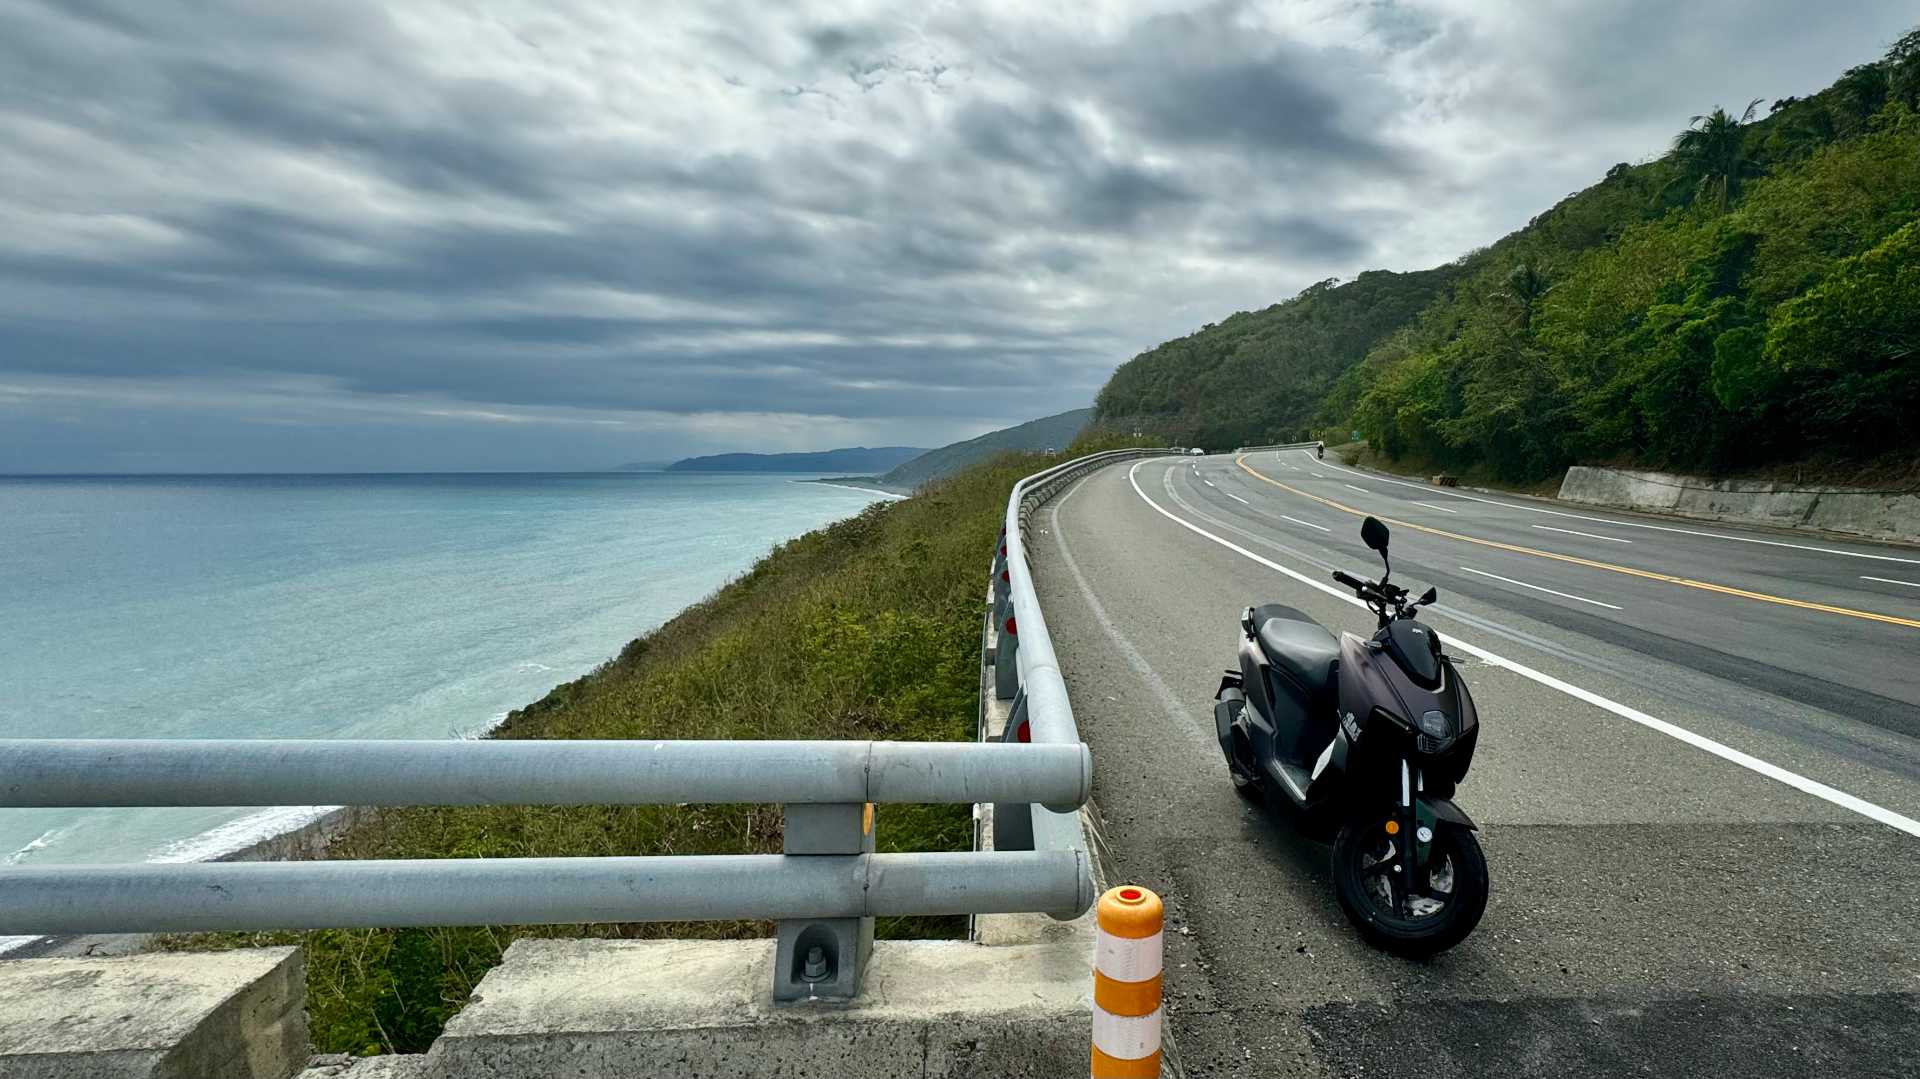 A scooter parked on the side of a four-lane coastal road, nested between forested mountains and a stony beach.